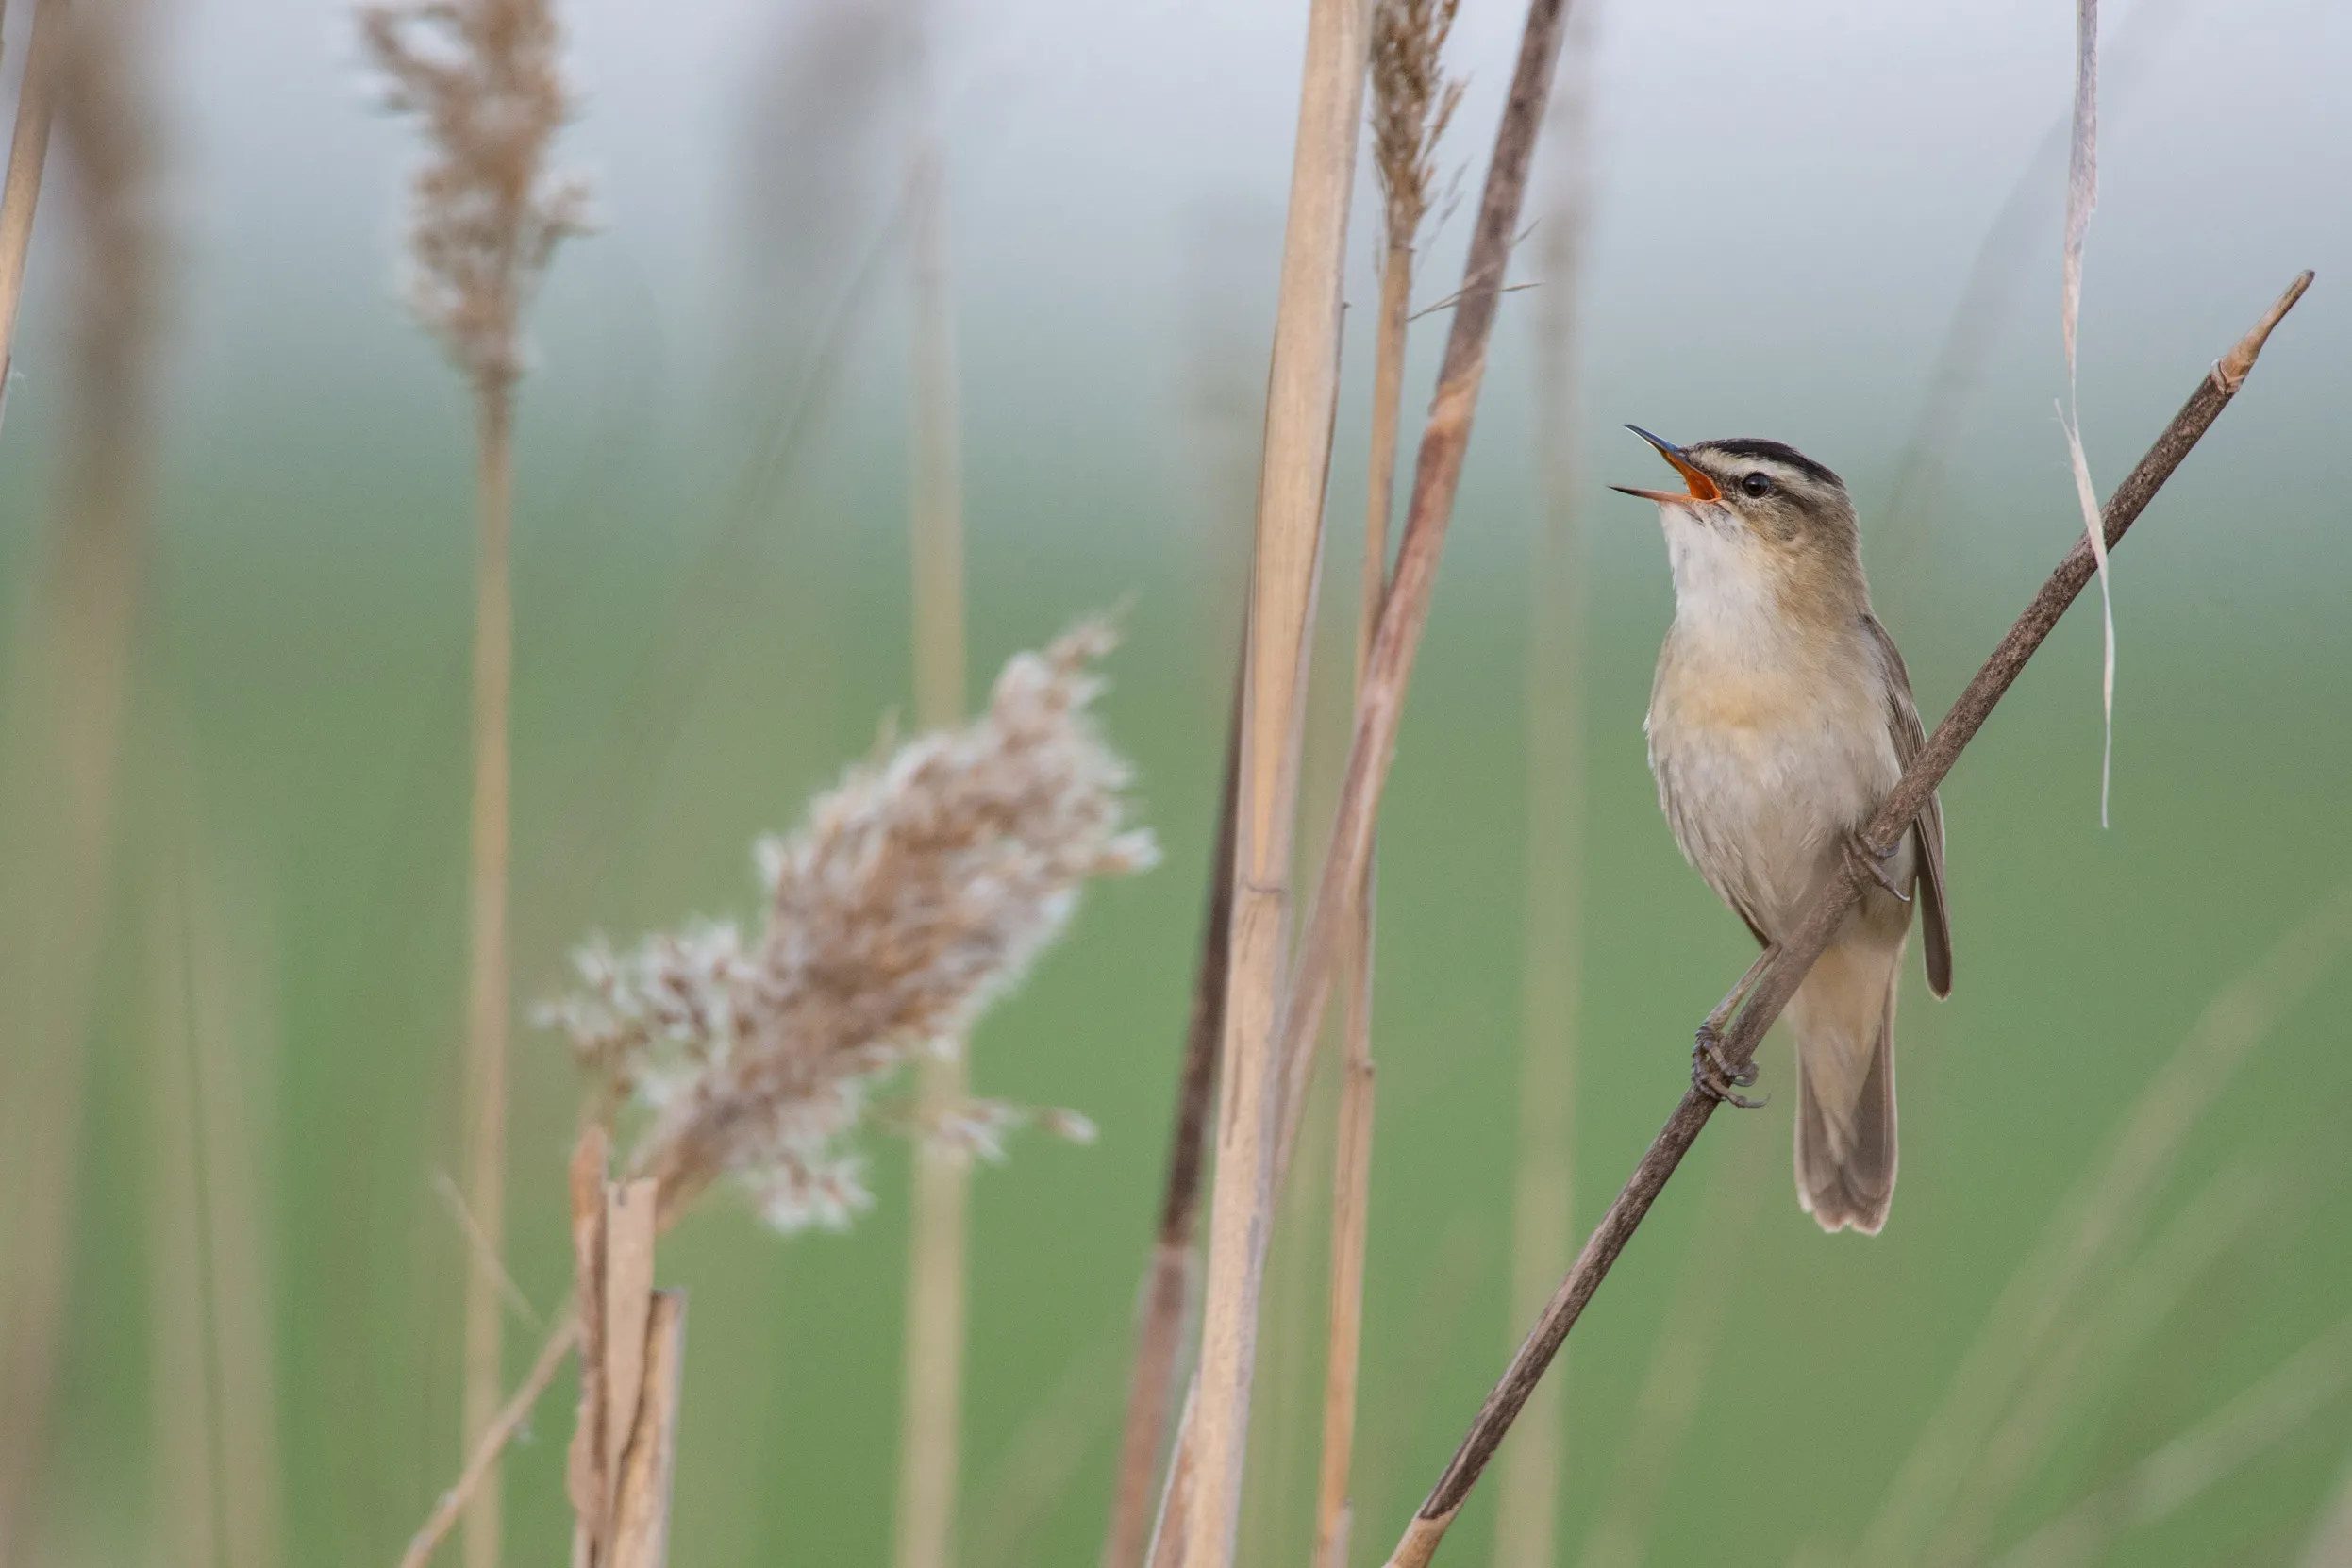 A lone Sedge Warbler perched on a reed singing.